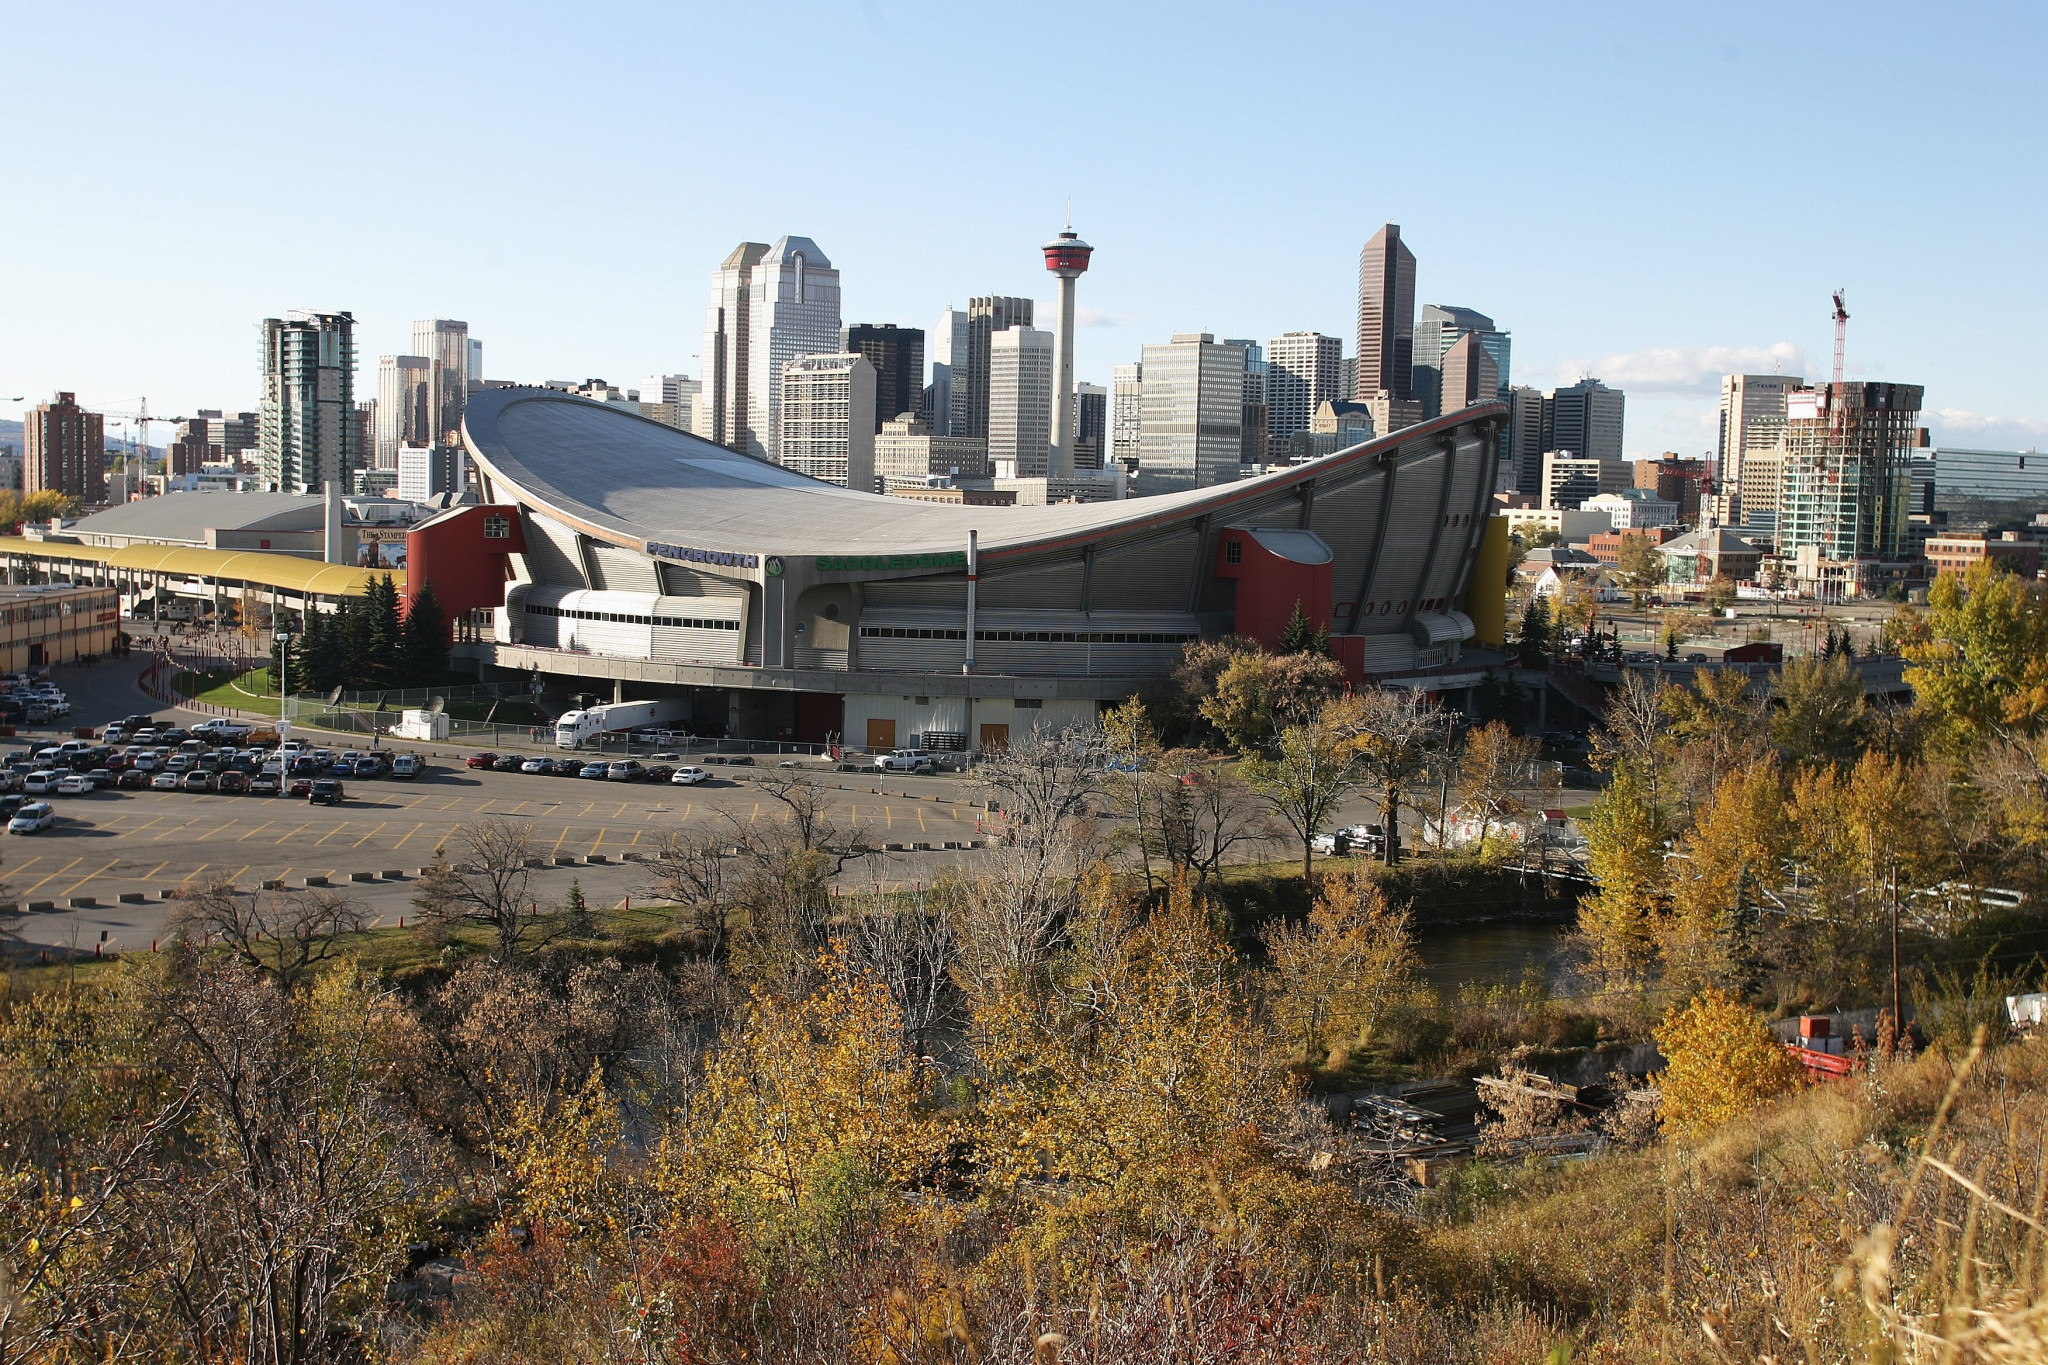 Calgary is facing a plebiscite on its 2026 Winter Olympic and Paralympic bid later this year ©Getty Images